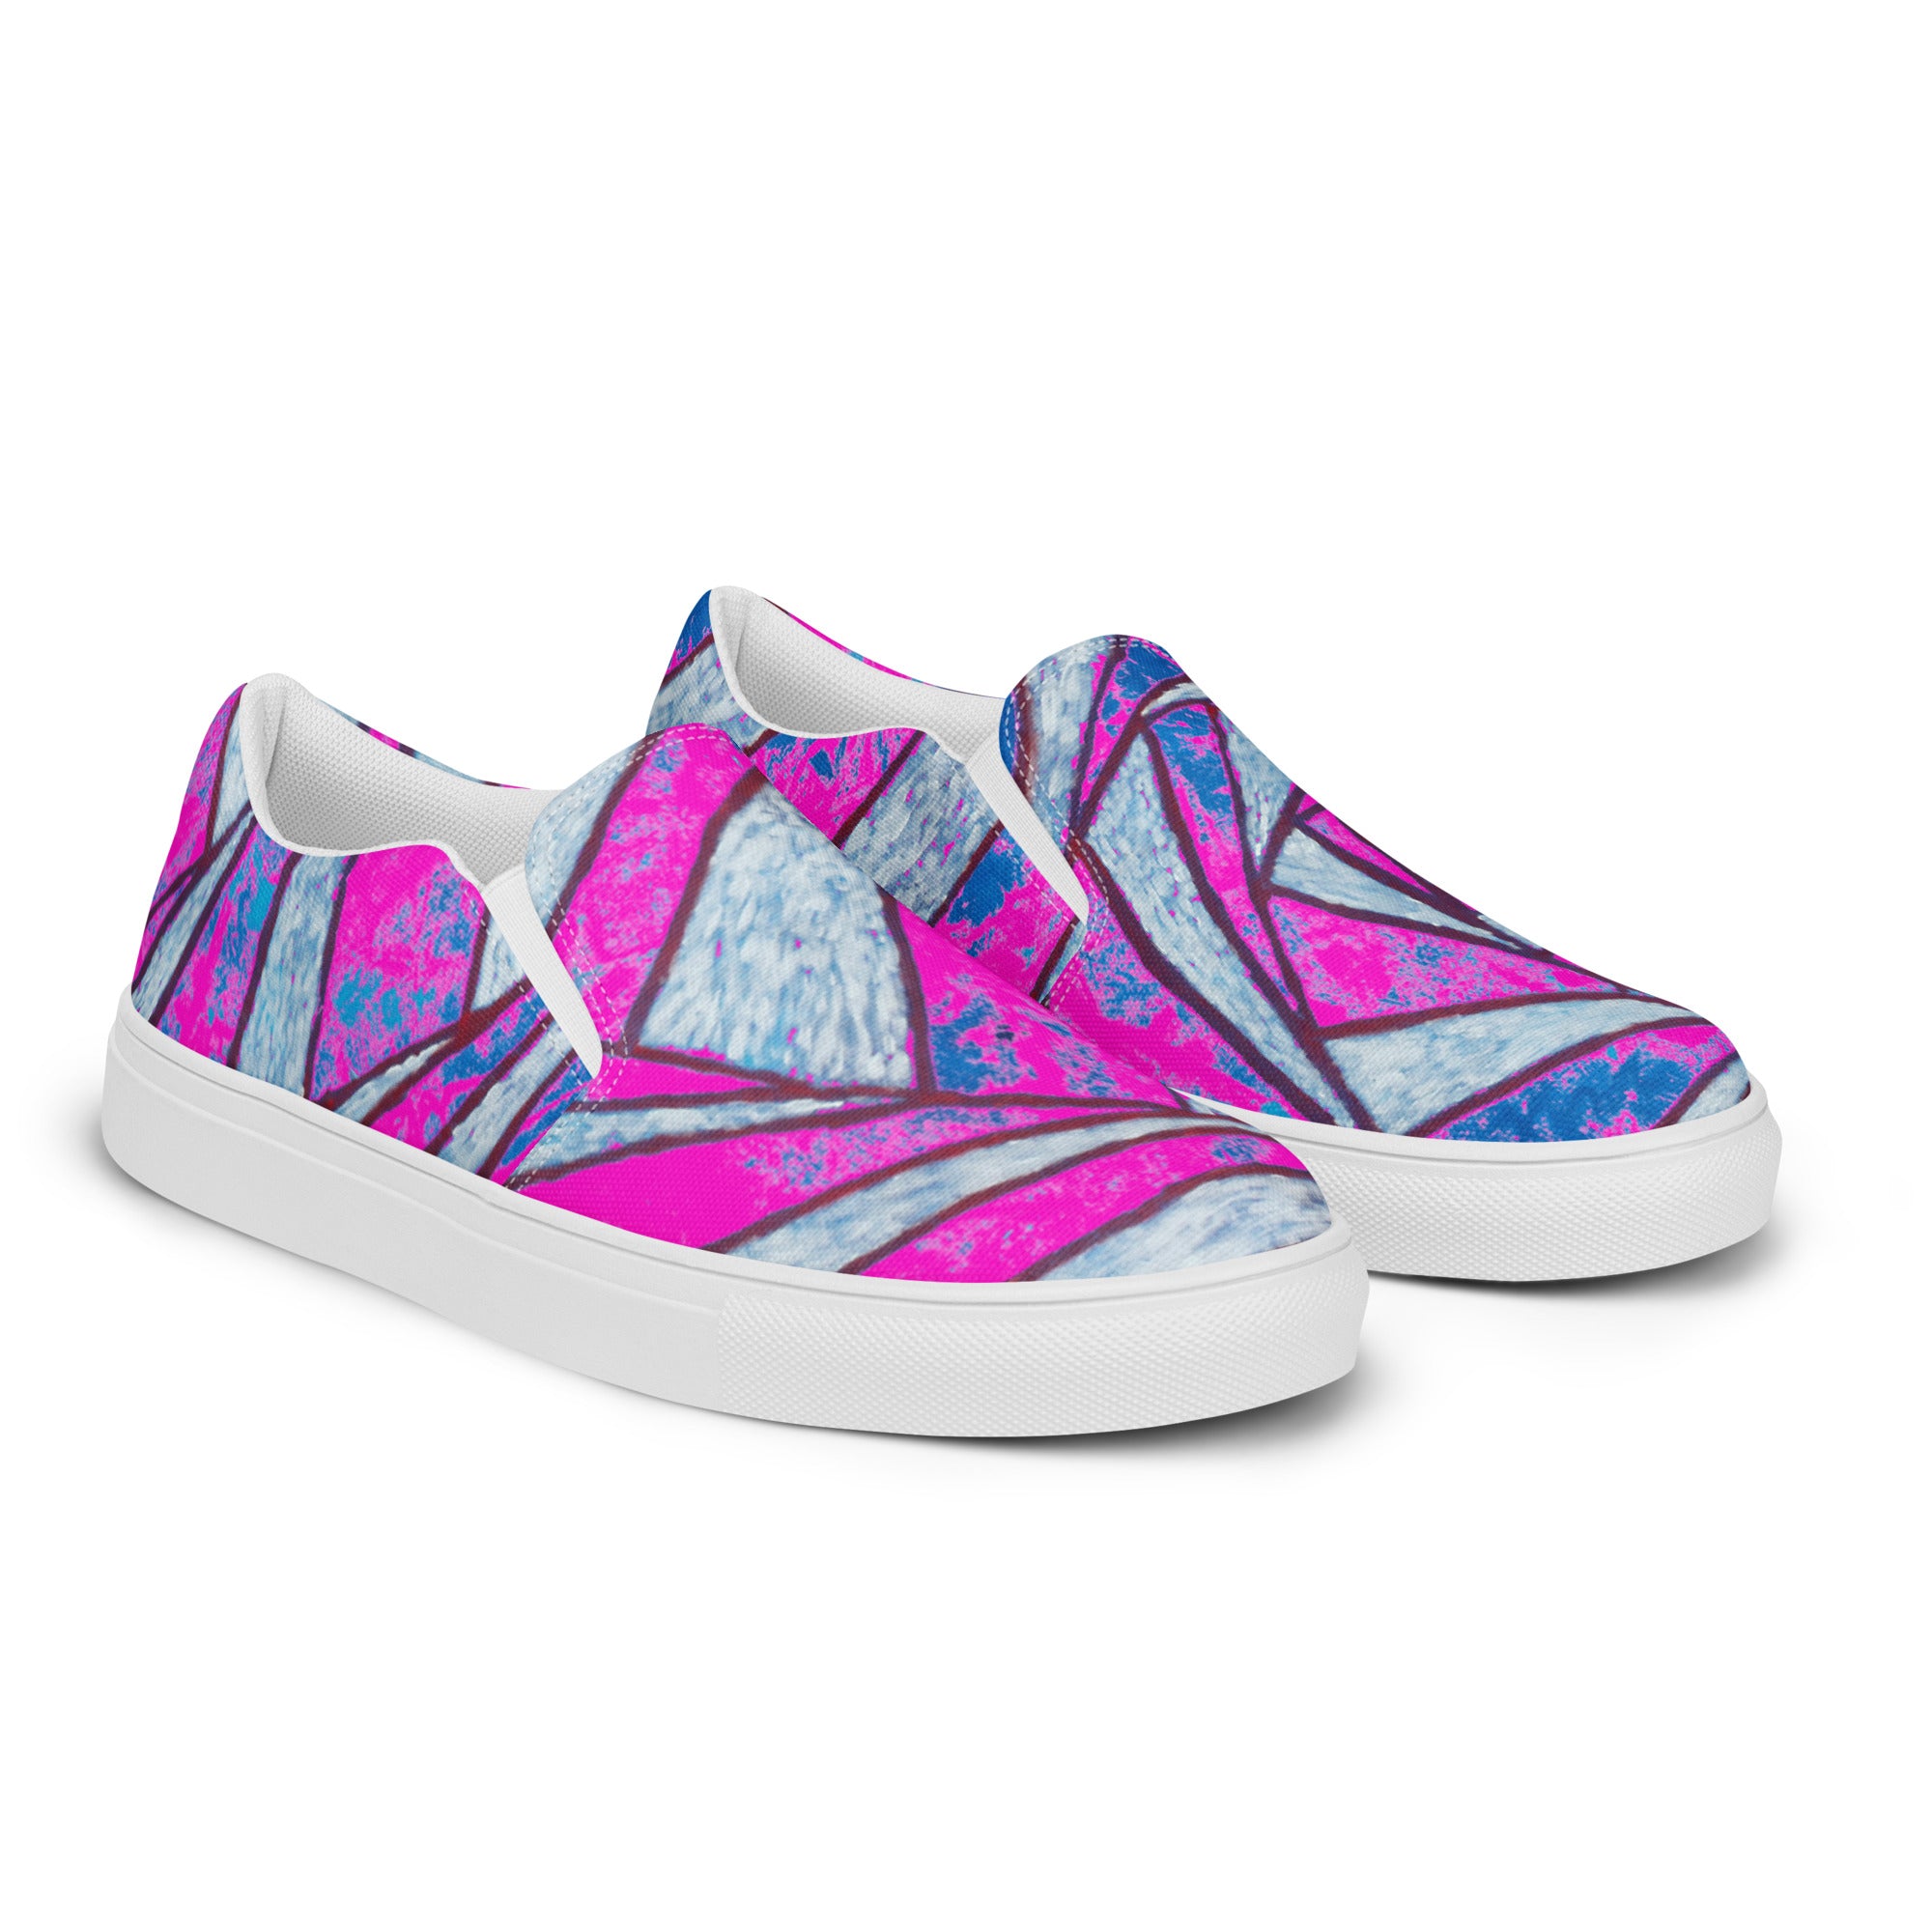 Inter-dimensional Women’s slip-on canvas shoes